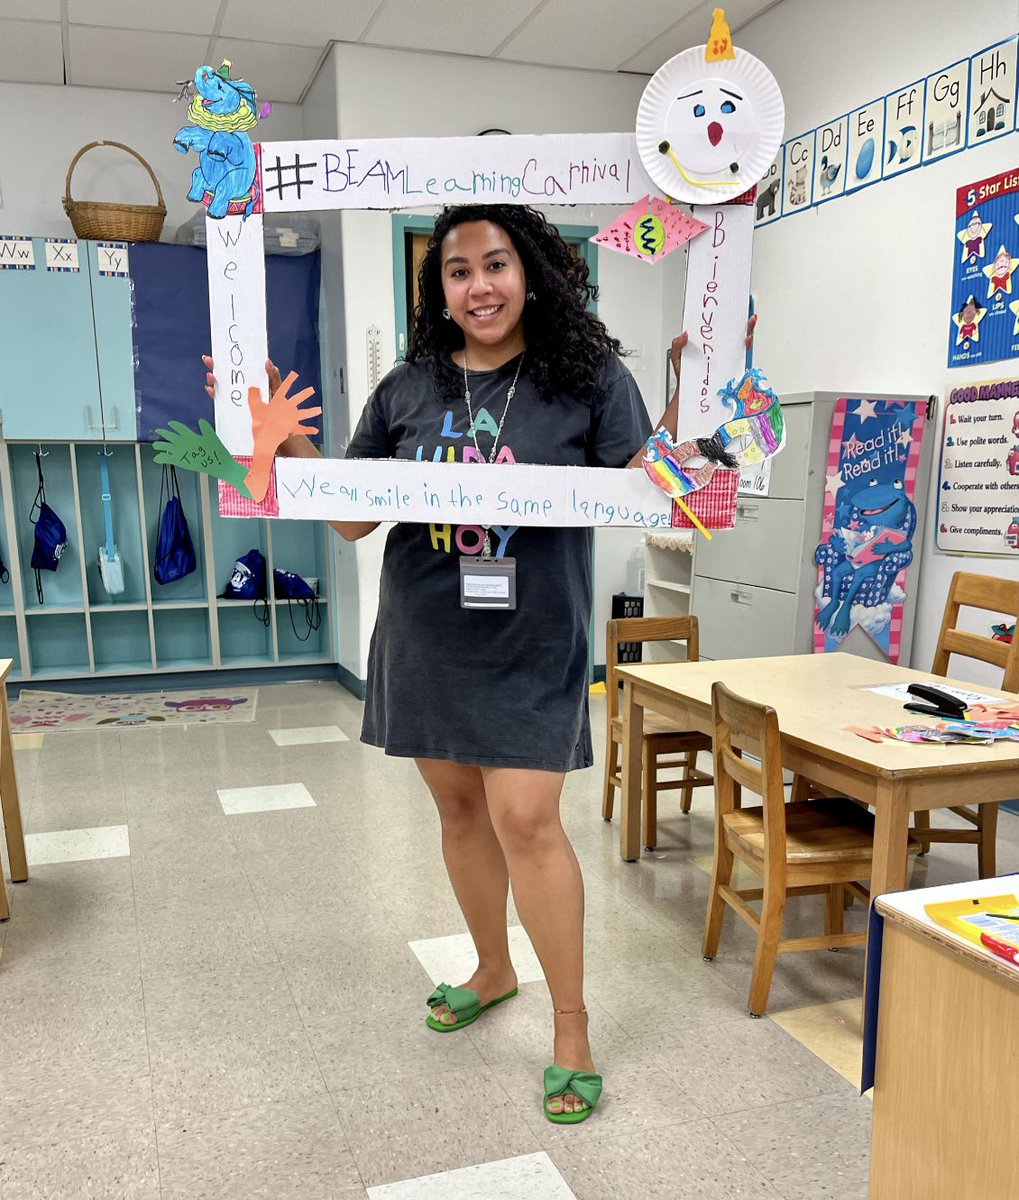 Getting ready for carnival day! 🎪🤹‍♀️🎡Make sure to stop by our table and take pictures with our Photo Booth props! 📸Always remember that we smile in the same language! 🤡#EnglishLanguageLearners #BEAMLearningCarnival @WestNYSchools @KatLovesKinder @WNYSDBilingual